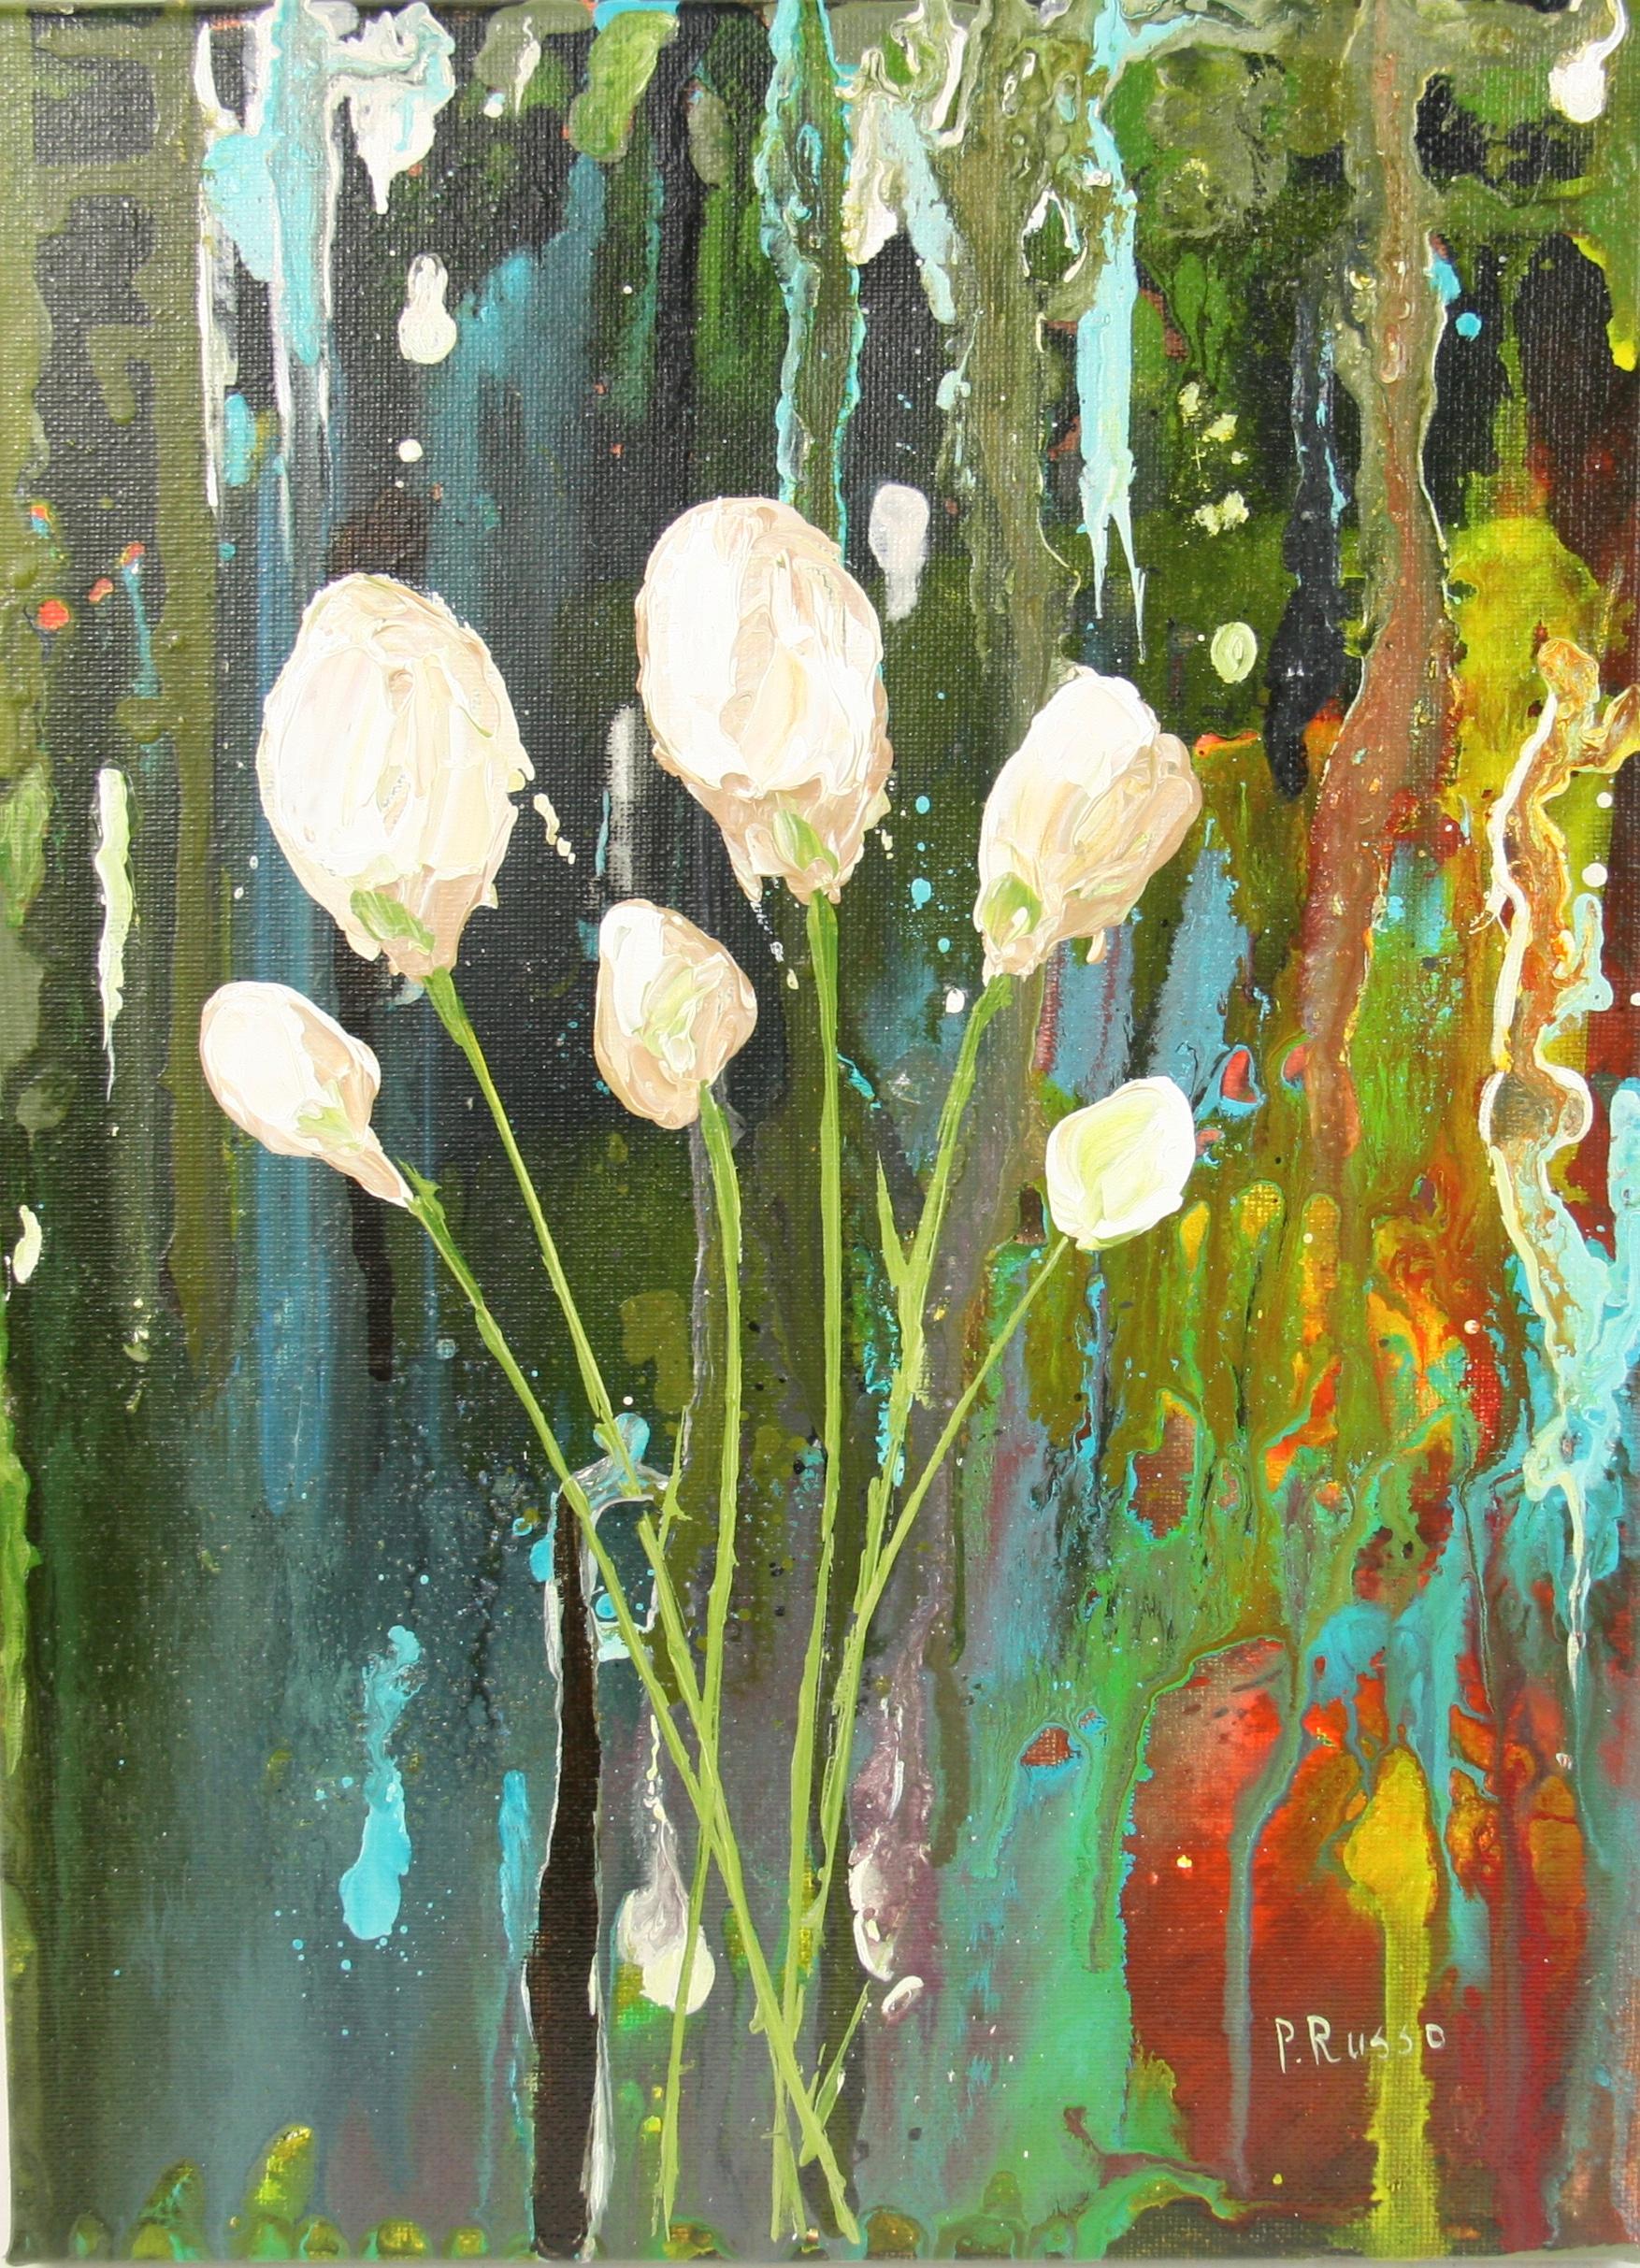 Unknown Abstract Painting - Floral Acrylic Painting White Tulips Abstract by Patrizia Russo